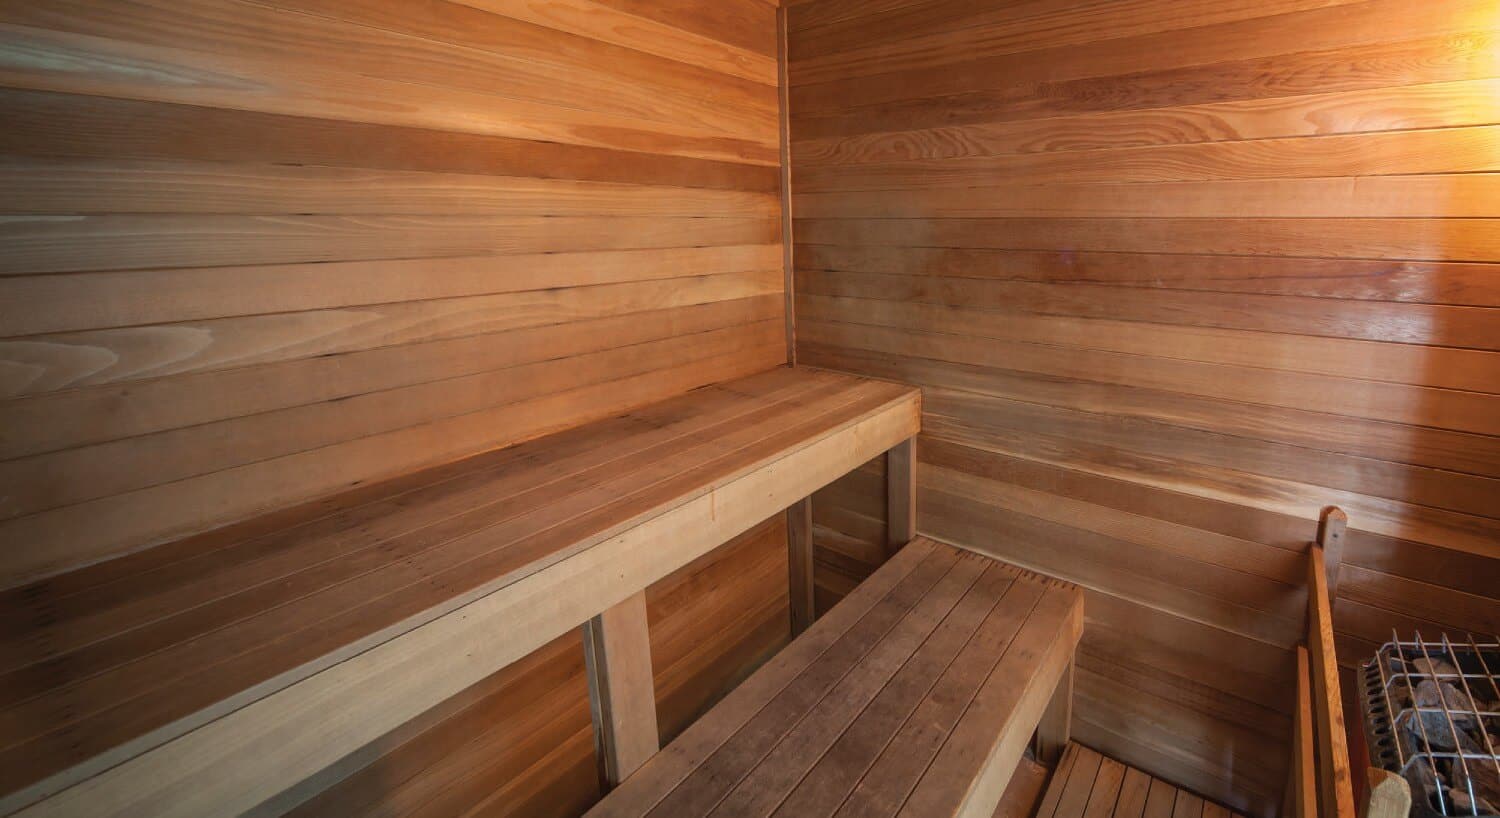 Interior of a sauna with wood walls and two bench seats